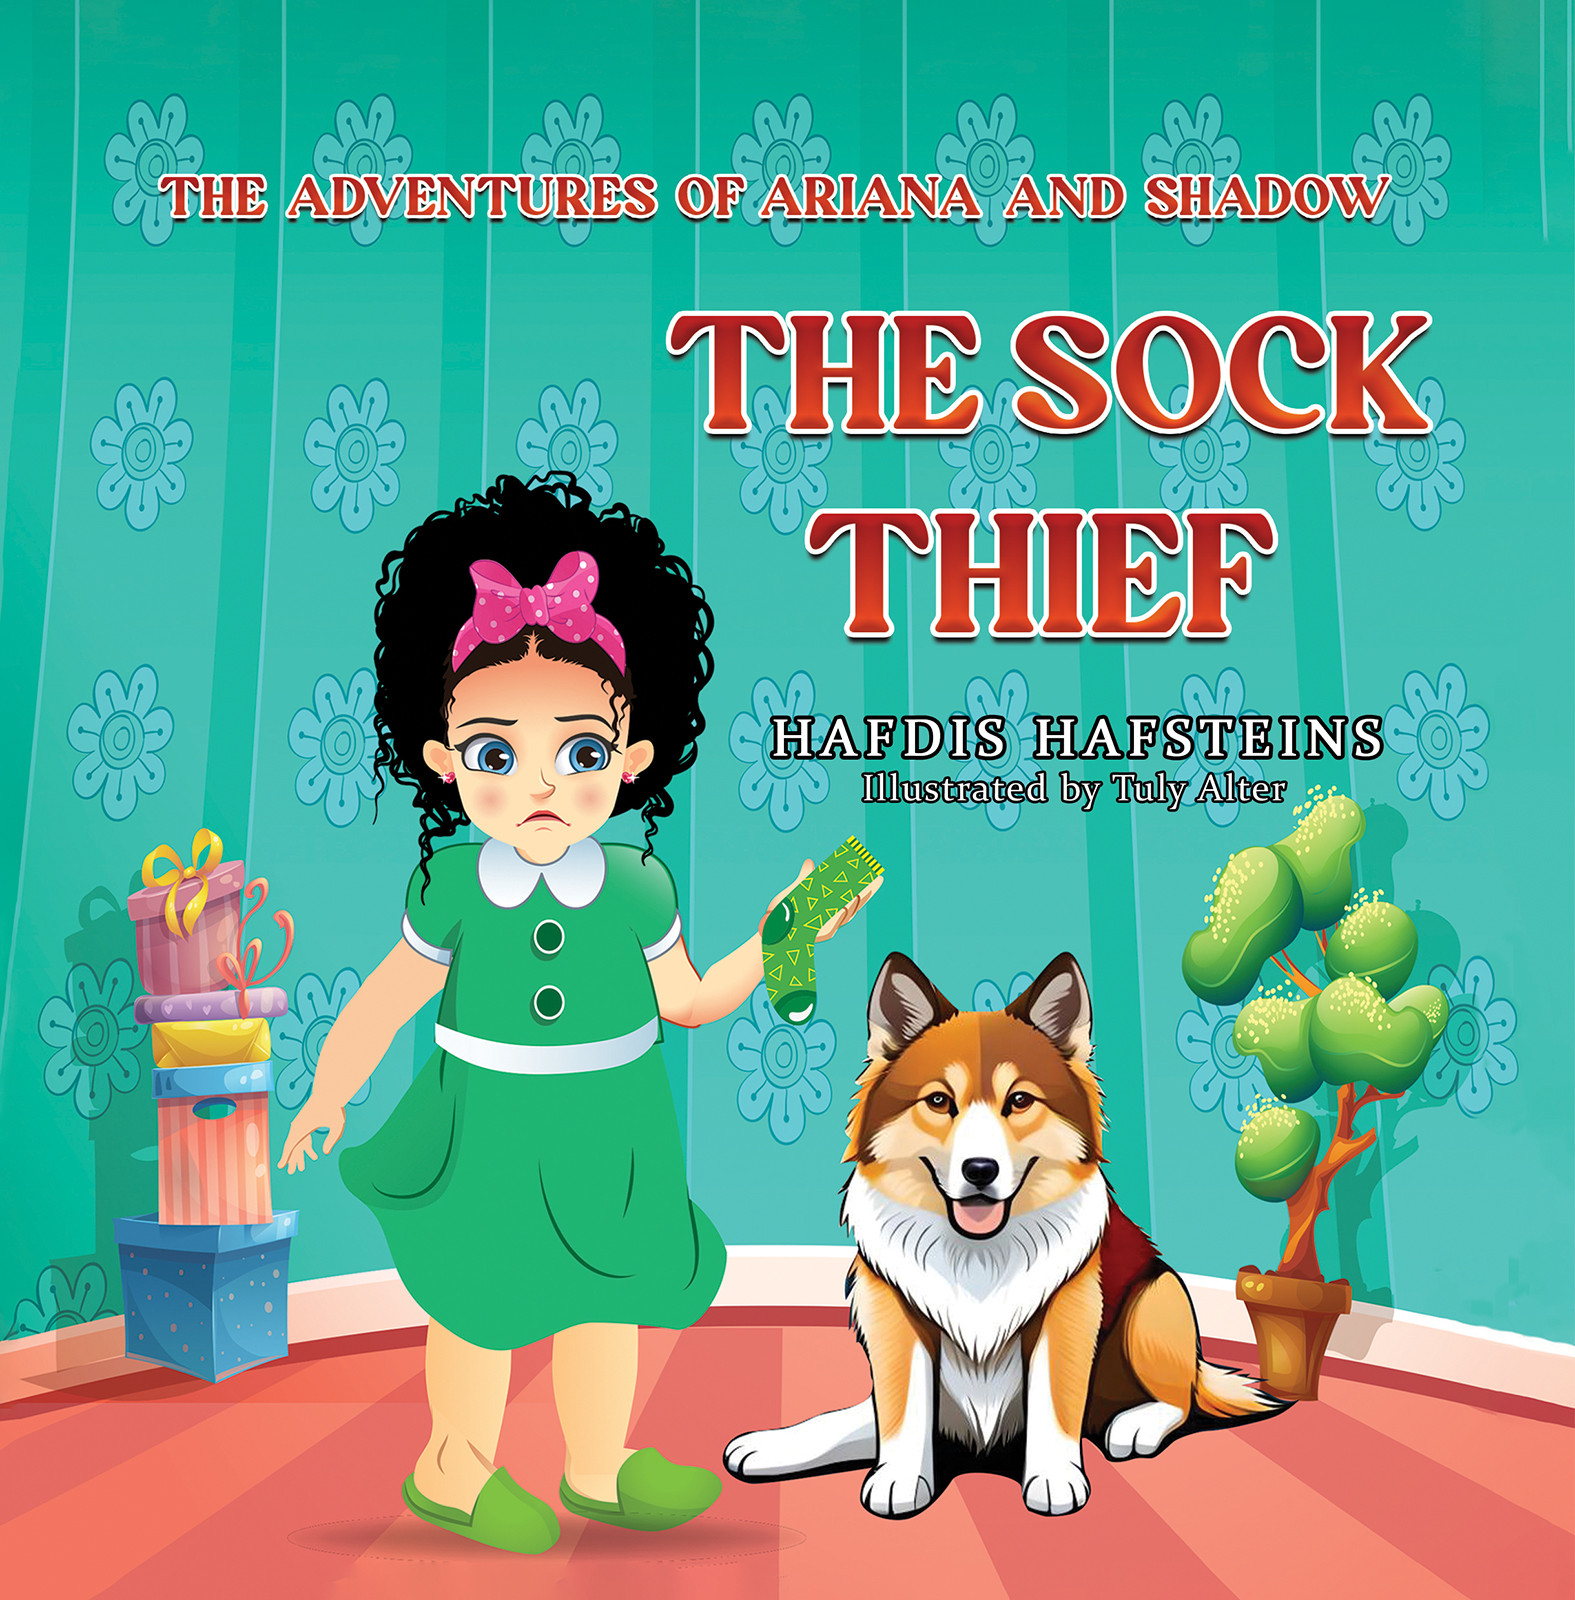 The Adventures of Ariana and Shadow: The Sock Thief